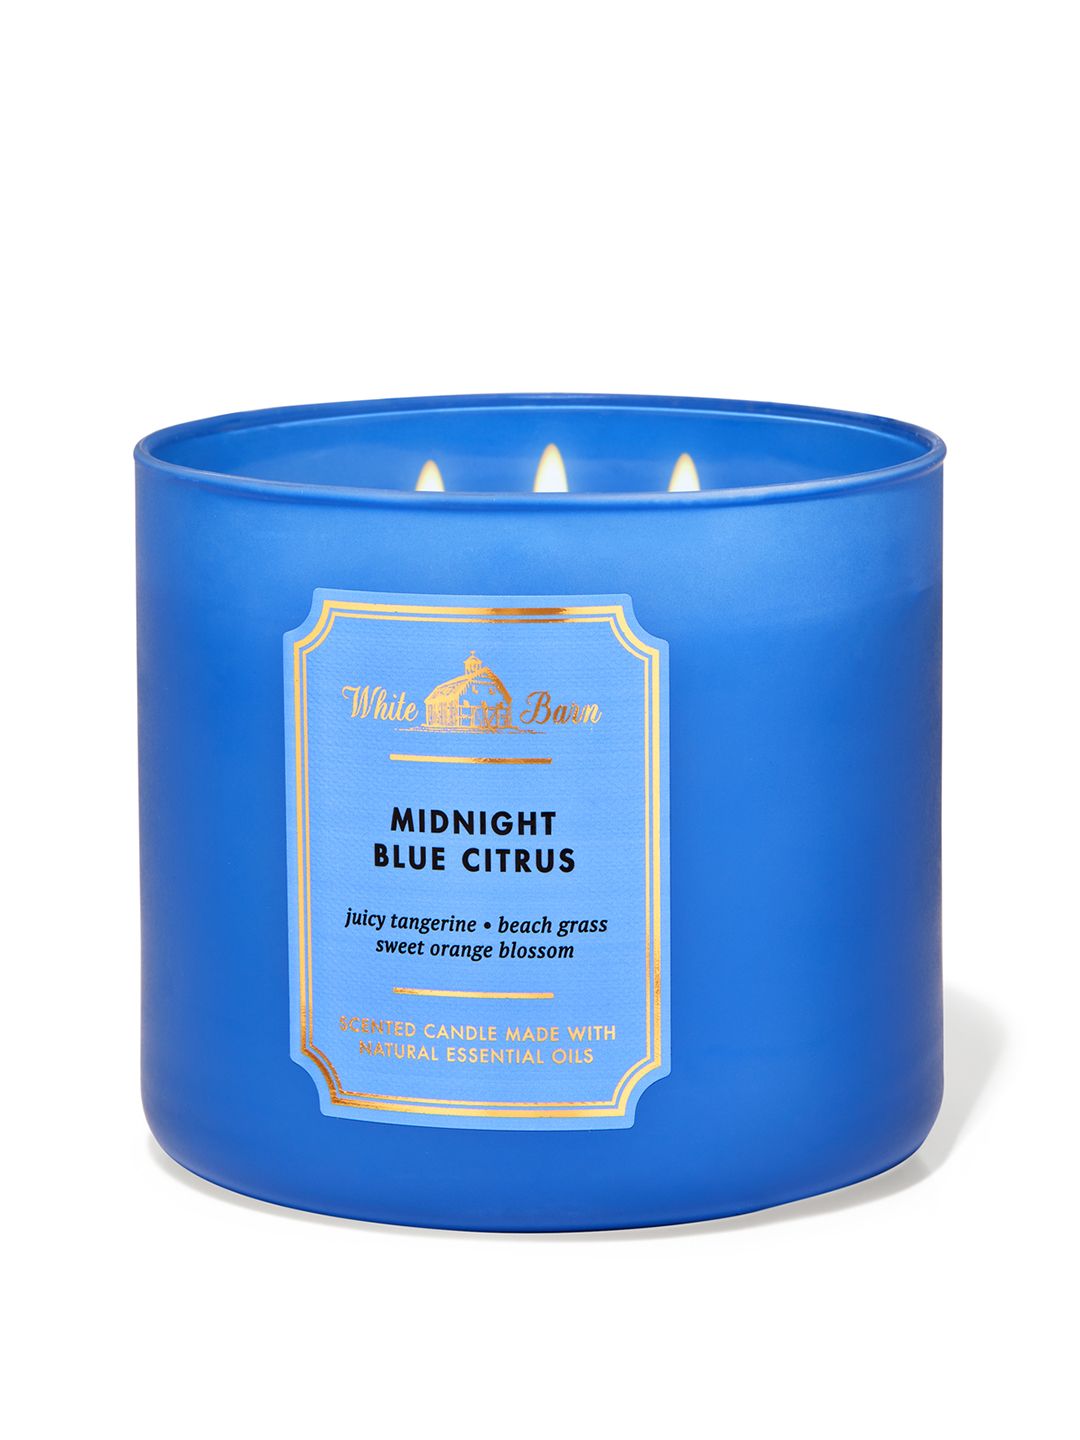 Bath & Body Works Midnight Blue Citrus 3-Wick Scented Candle with Essential Oils - 411g Price in India